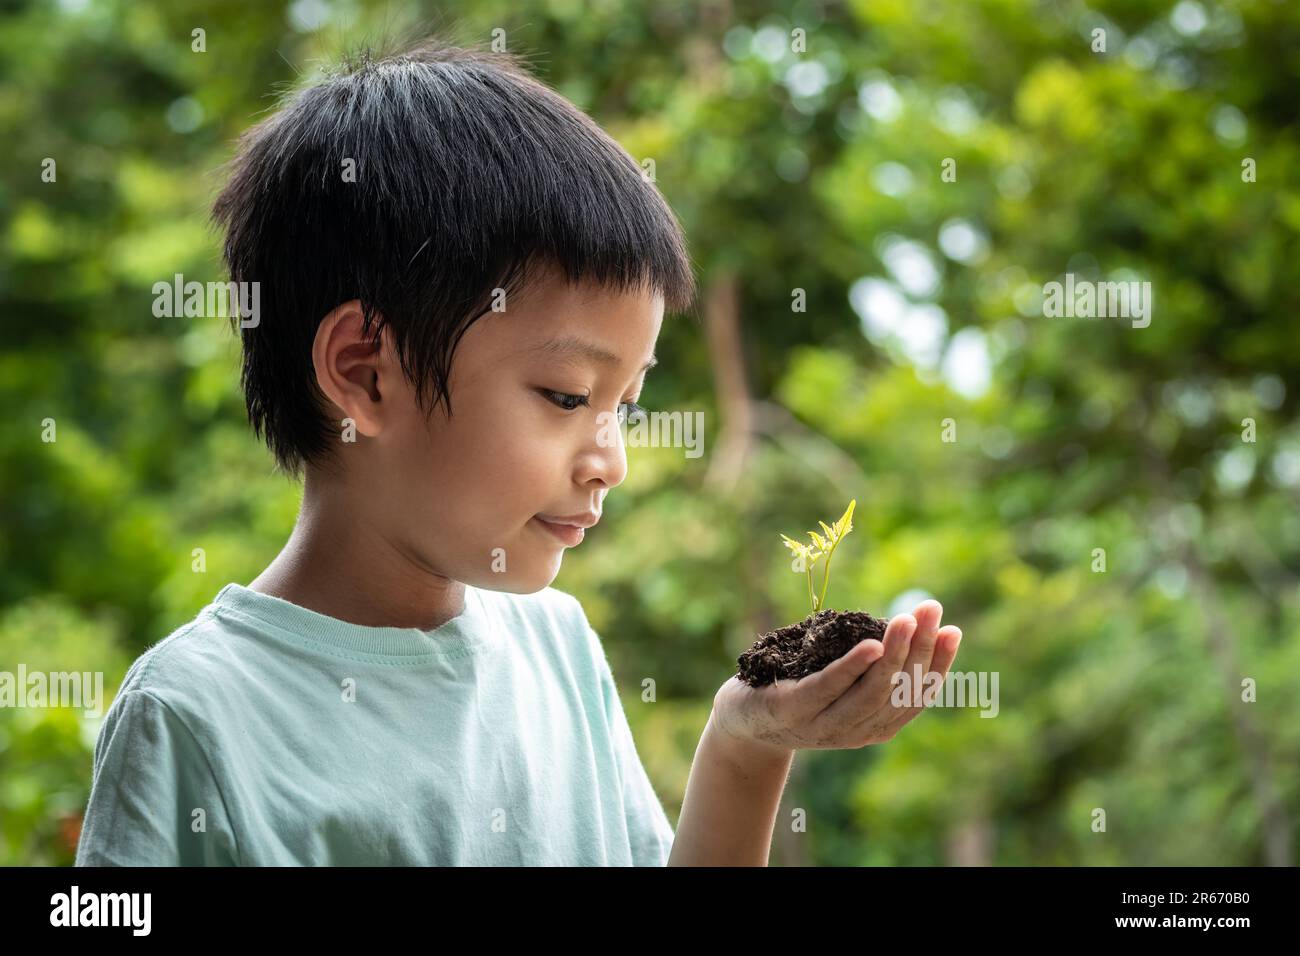 The little boy's hands are holding a small tree. Asian boy holding a seedling in his hand. The boy is smiling and stared at the small tree in his hand Stock Photo